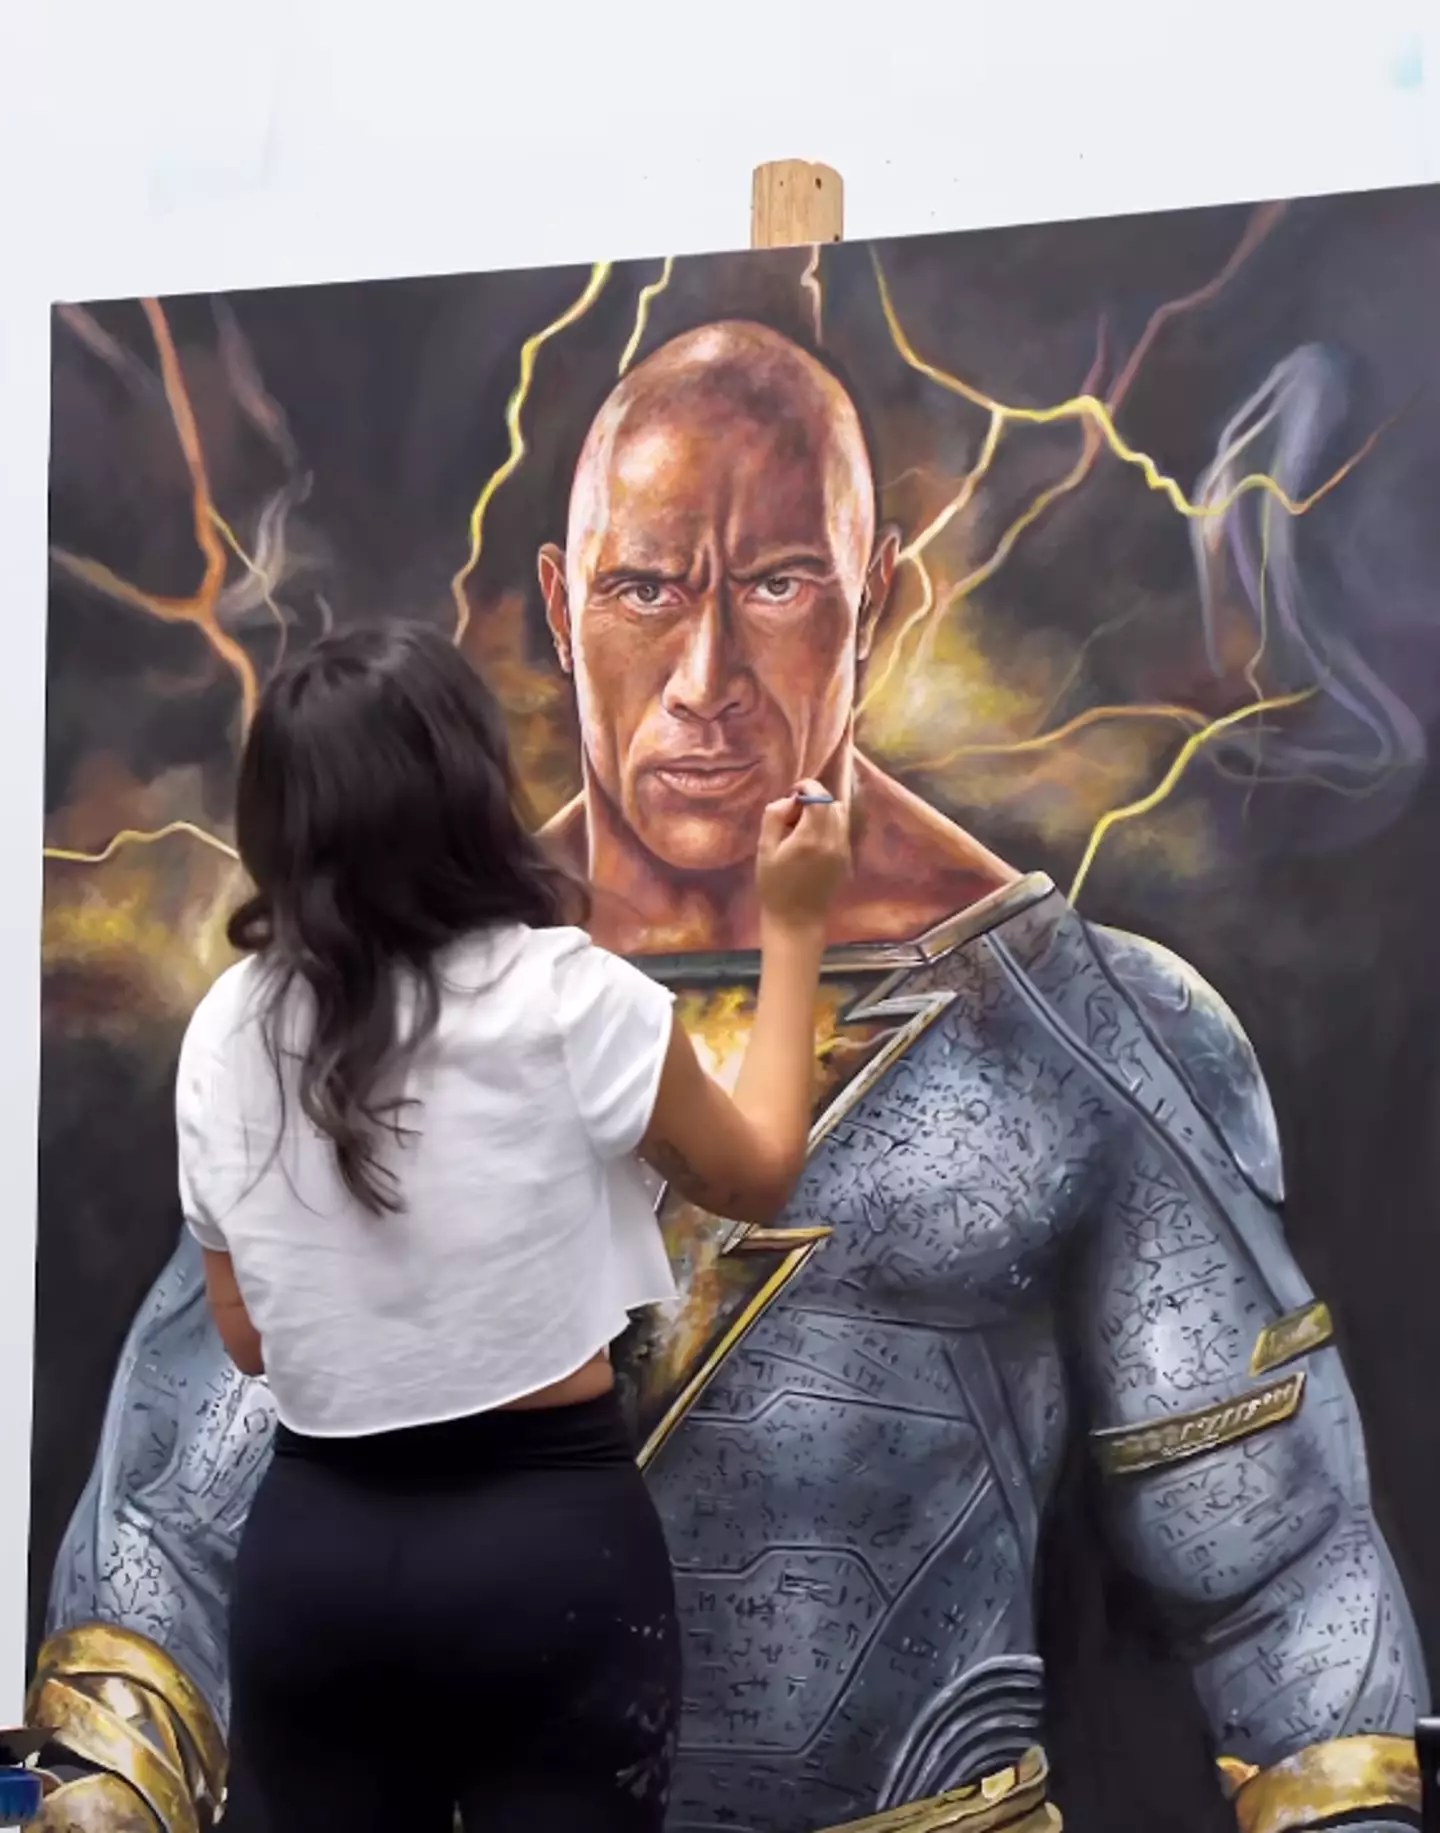 Weber presented the painting at the World Premiere for Black Adam.